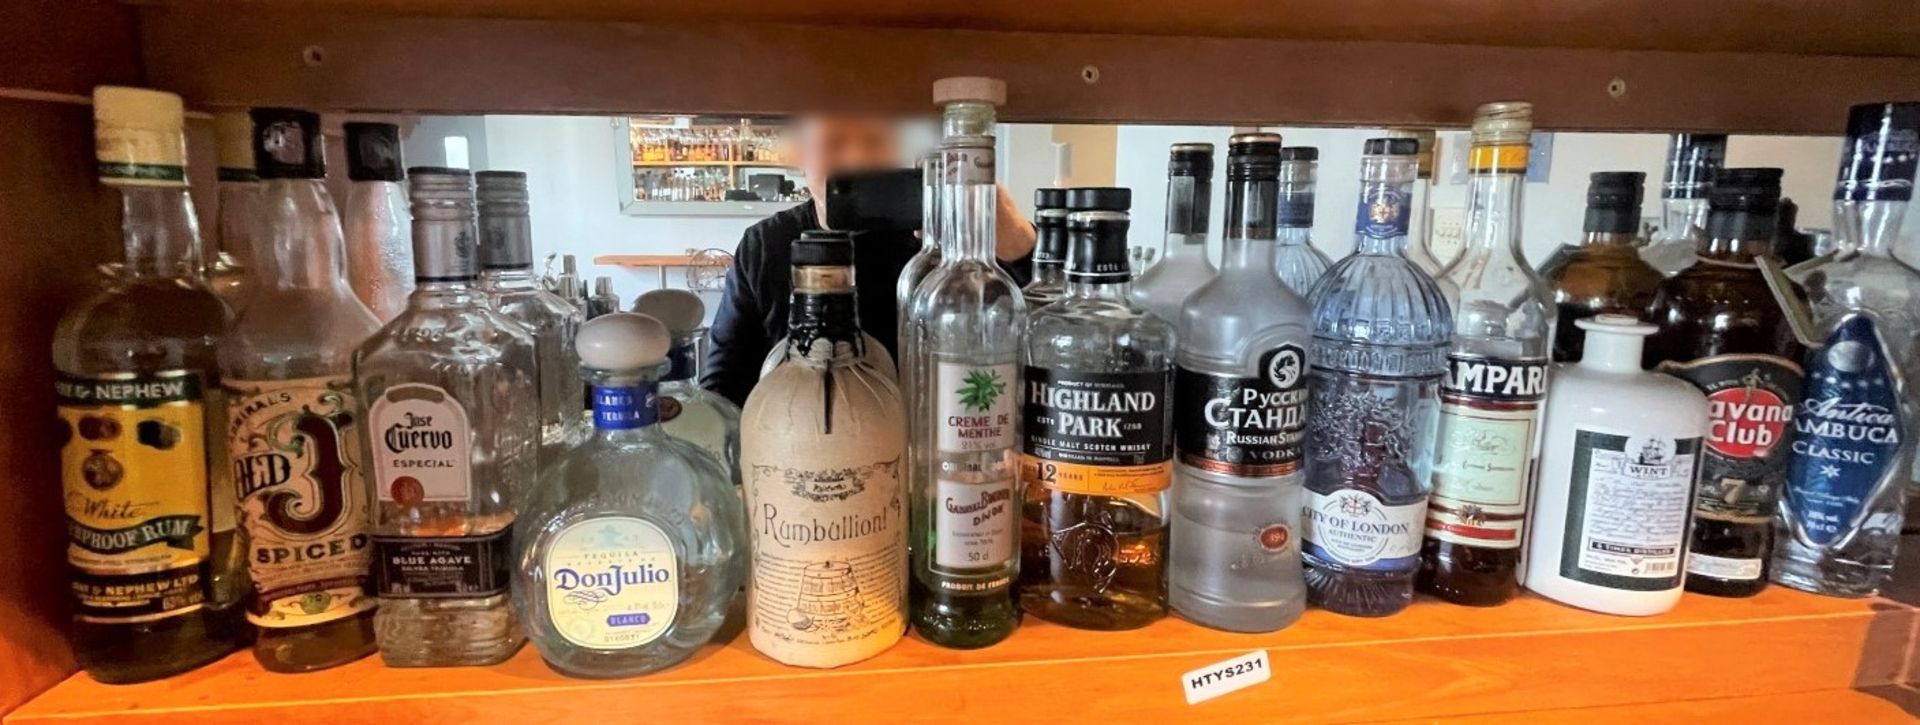 13 x Bottles of Various Spirits Including Sambuca, Vodka, Whisky, Gin, Rum and More - Part Used Open